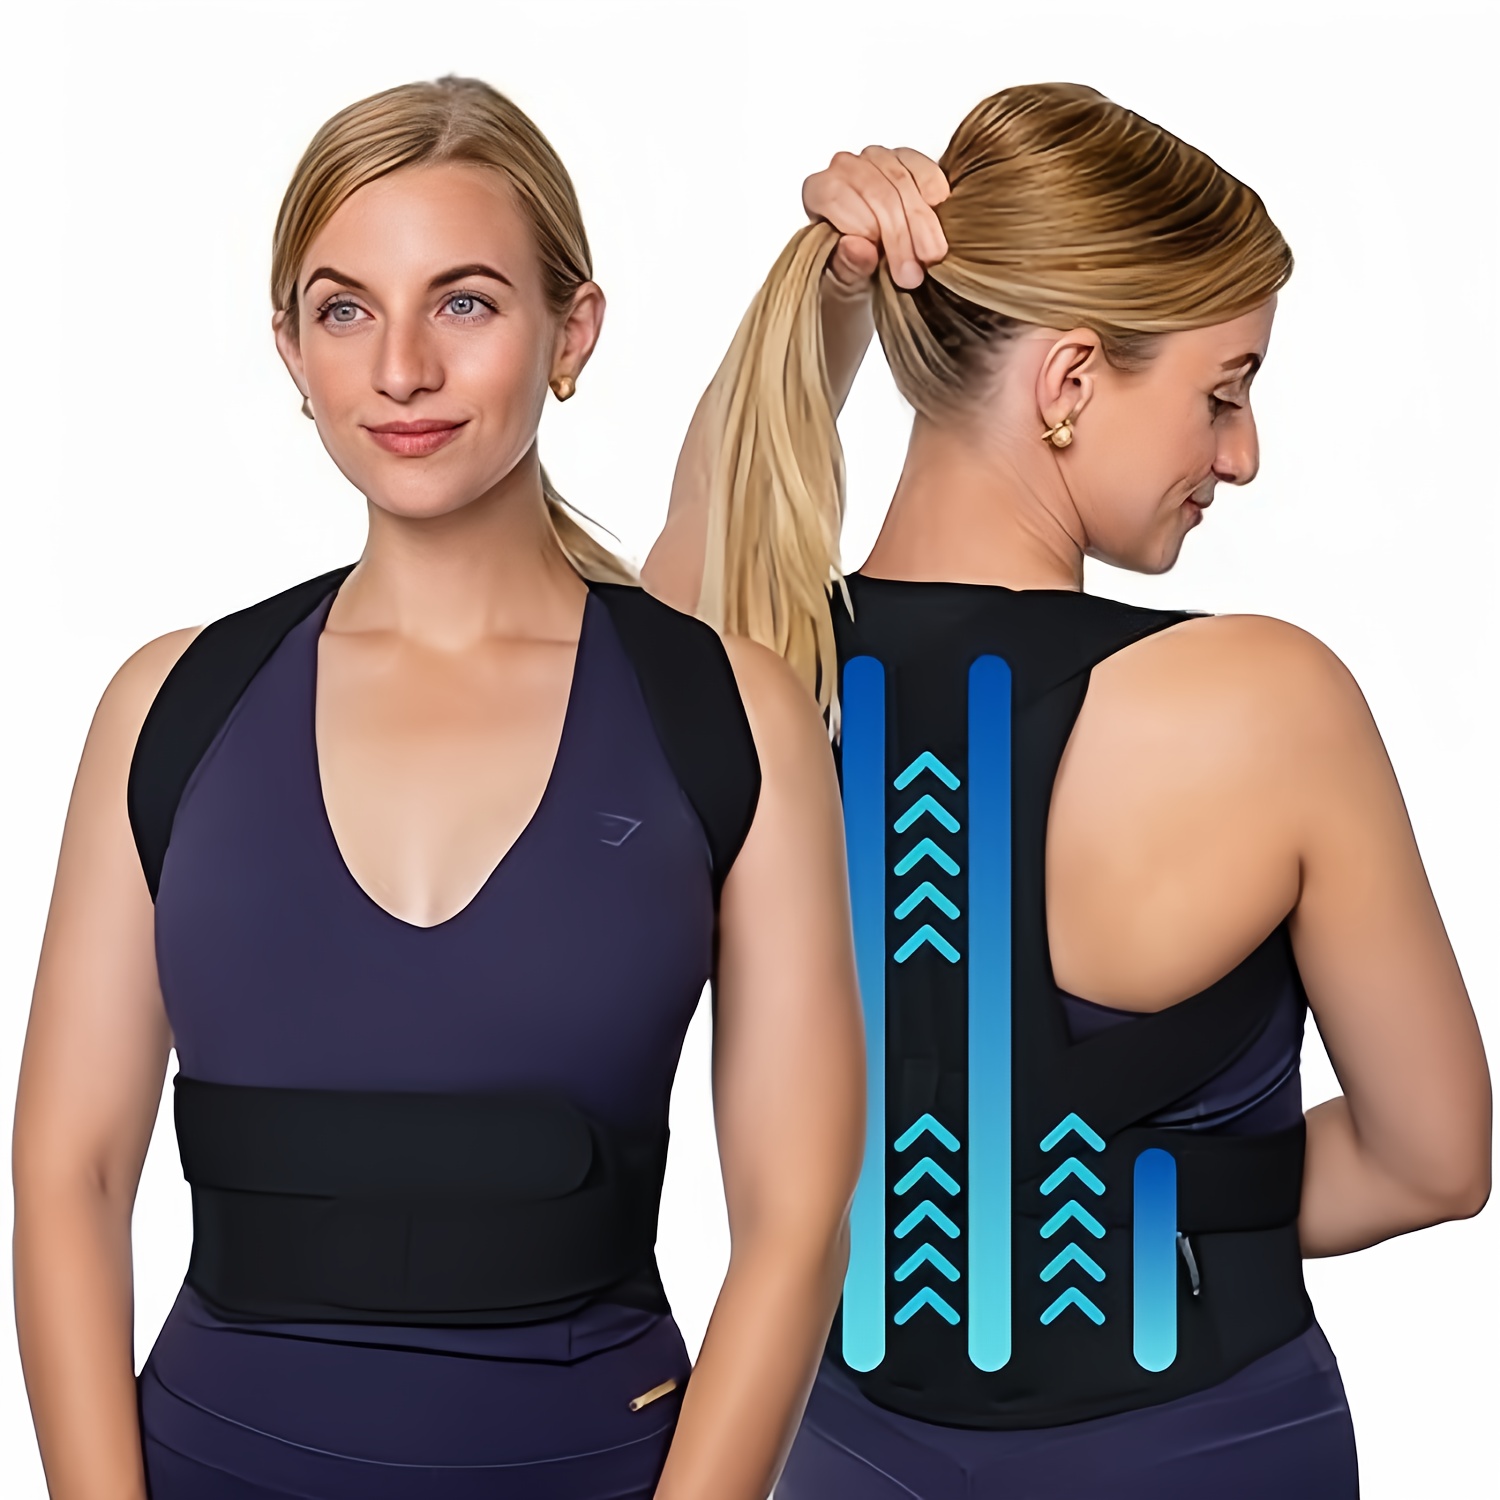 Back Braces for Lower Back Pain Relief, Breathable Back Support